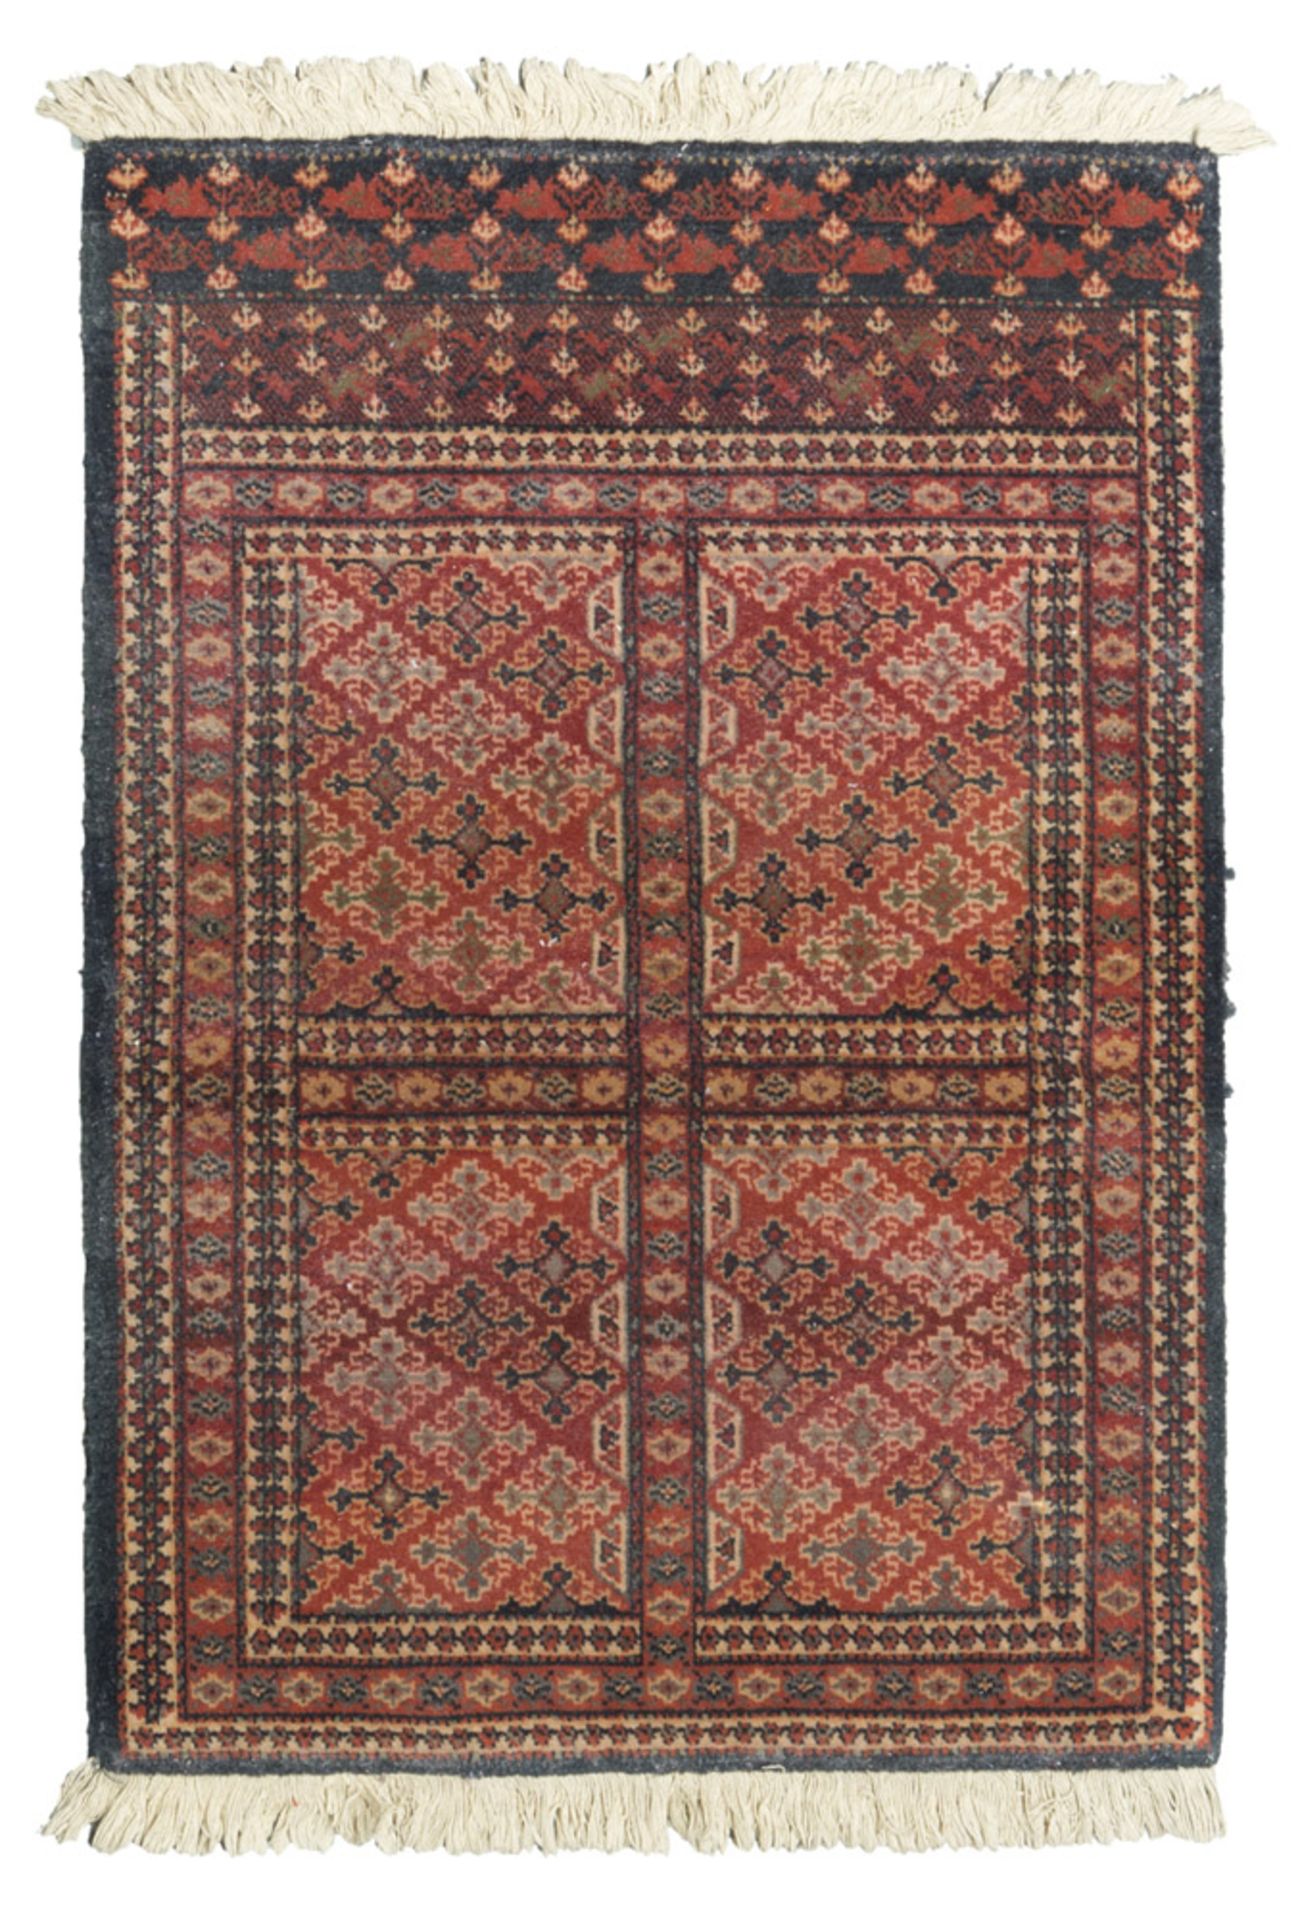 MECHANICAL FRAME CARPET, 20TH CENTURY with tiled design. Measures cm. 88 x 61. TAPPETO A TELAIO